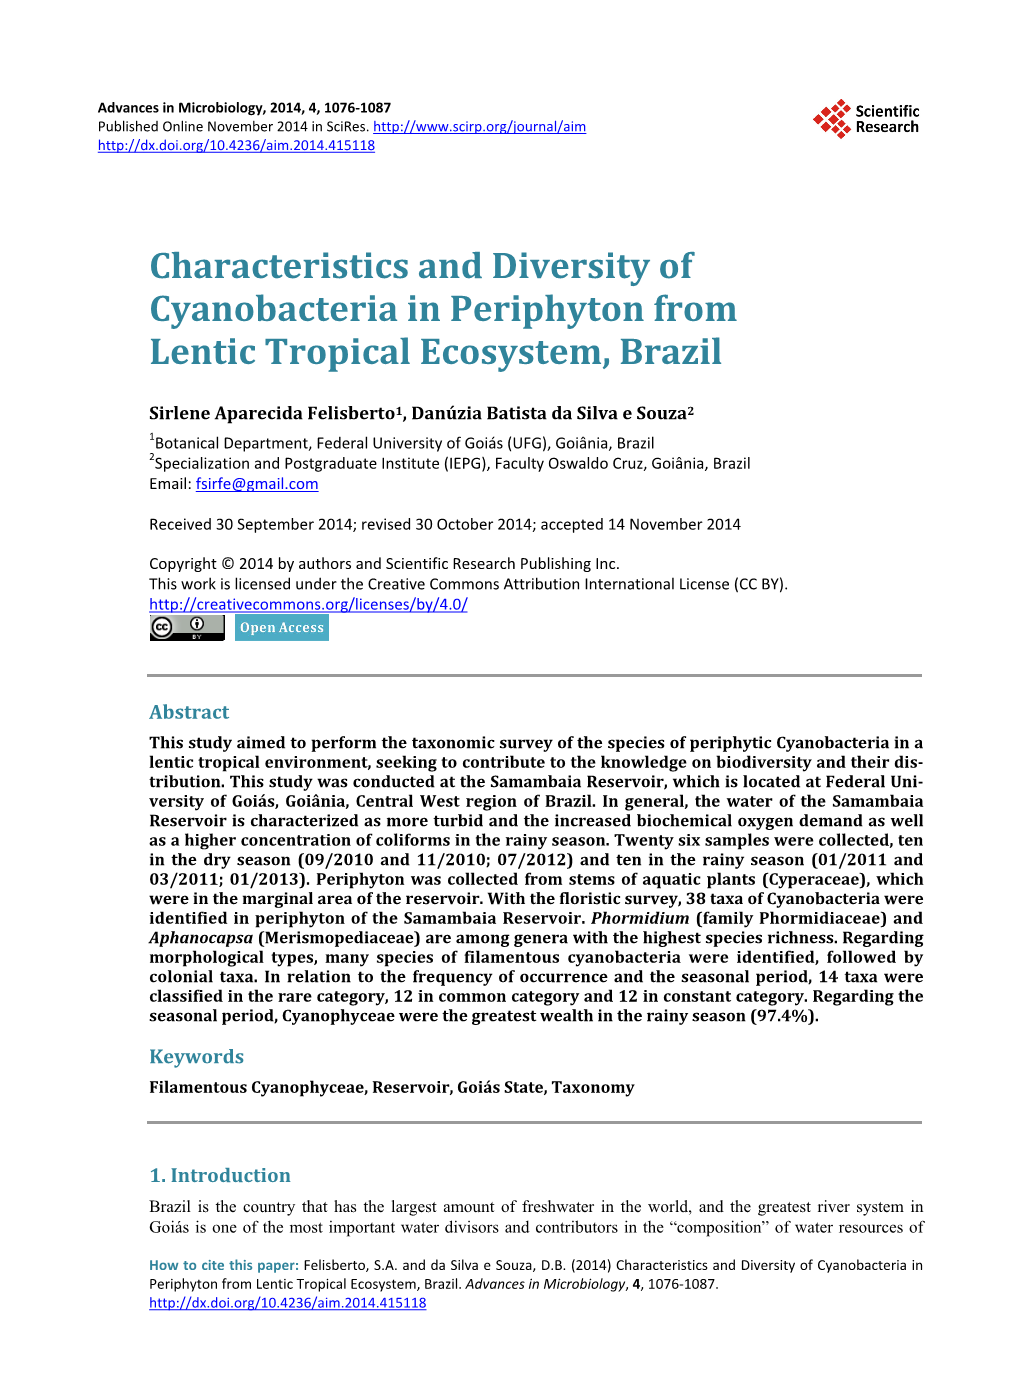 Characteristics and Diversity of Cyanobacteria in Periphyton from Lentic Tropical Ecosystem, Brazil